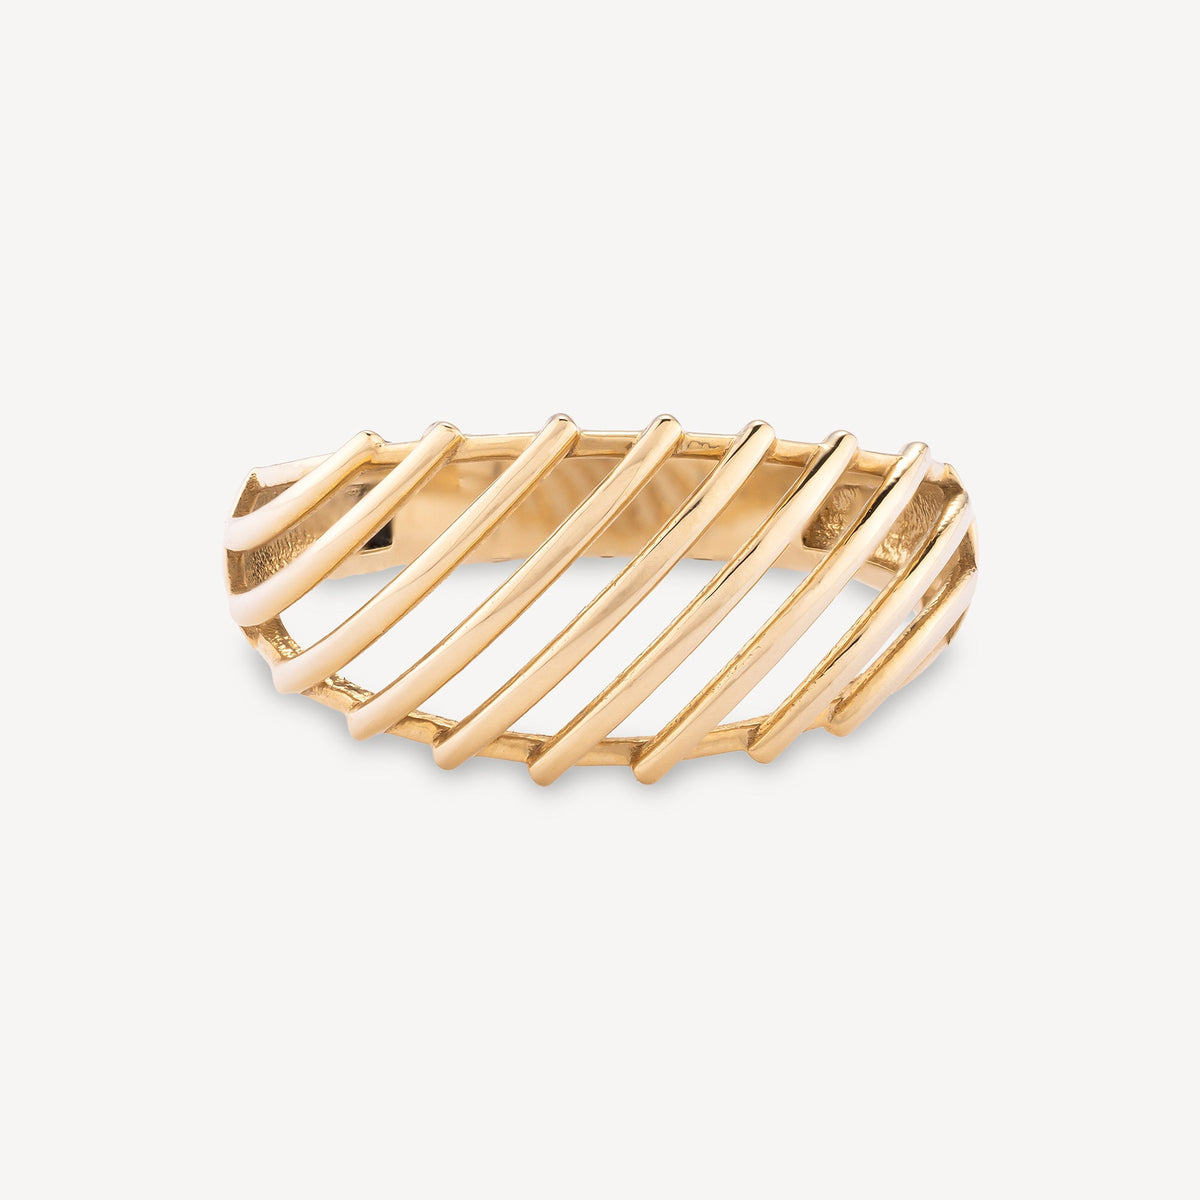 Gold cage ring